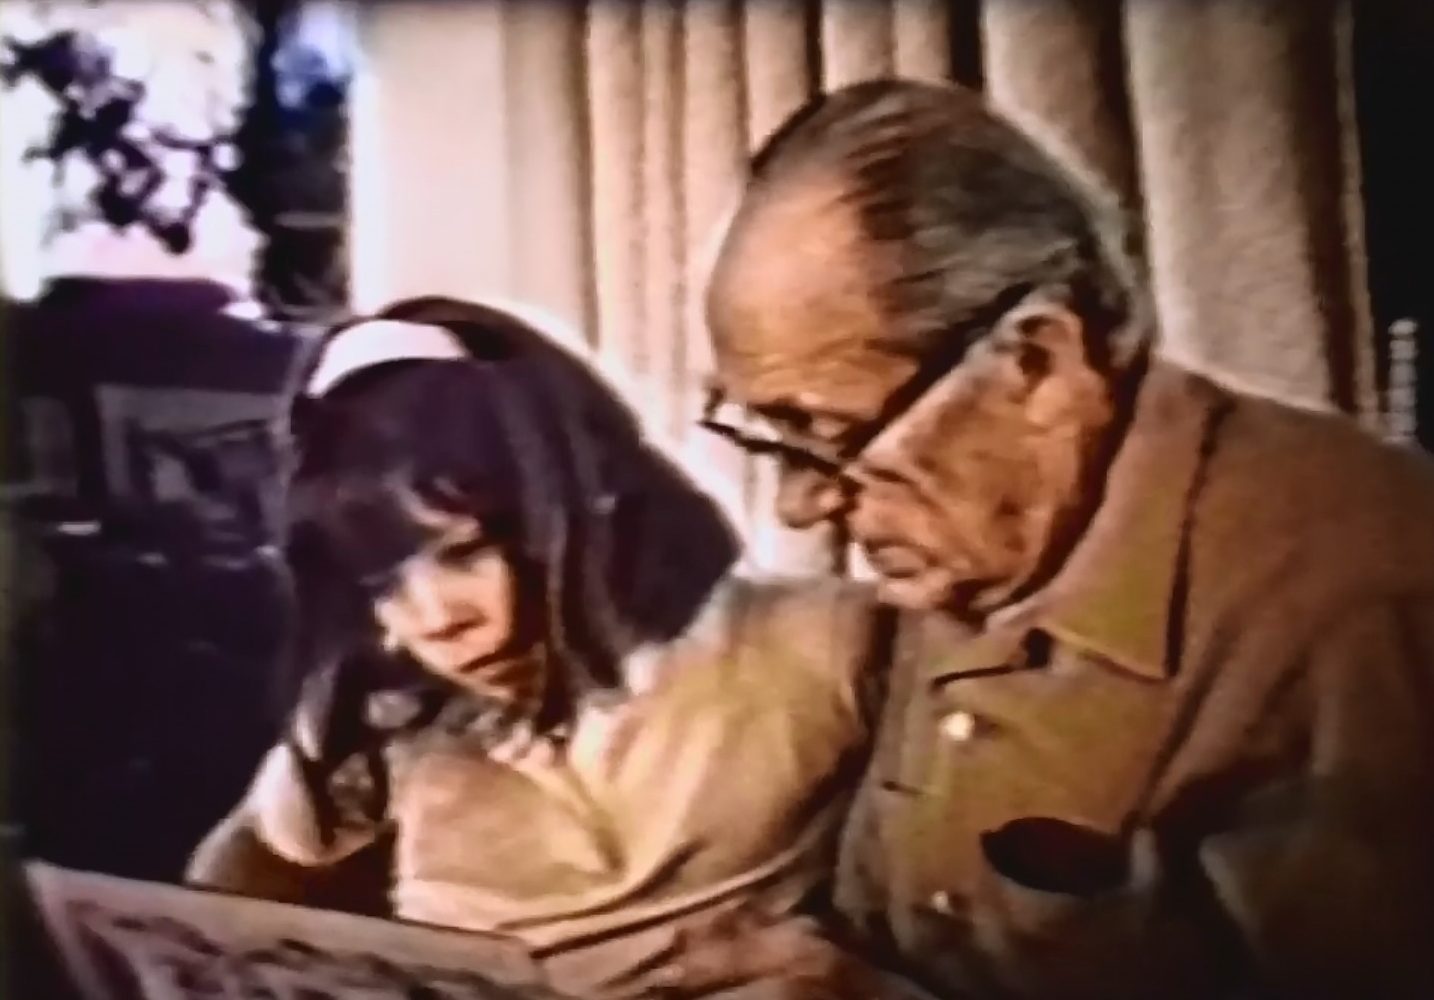 A blurred, upper body shot of an older man and young girl reading a picture book together.